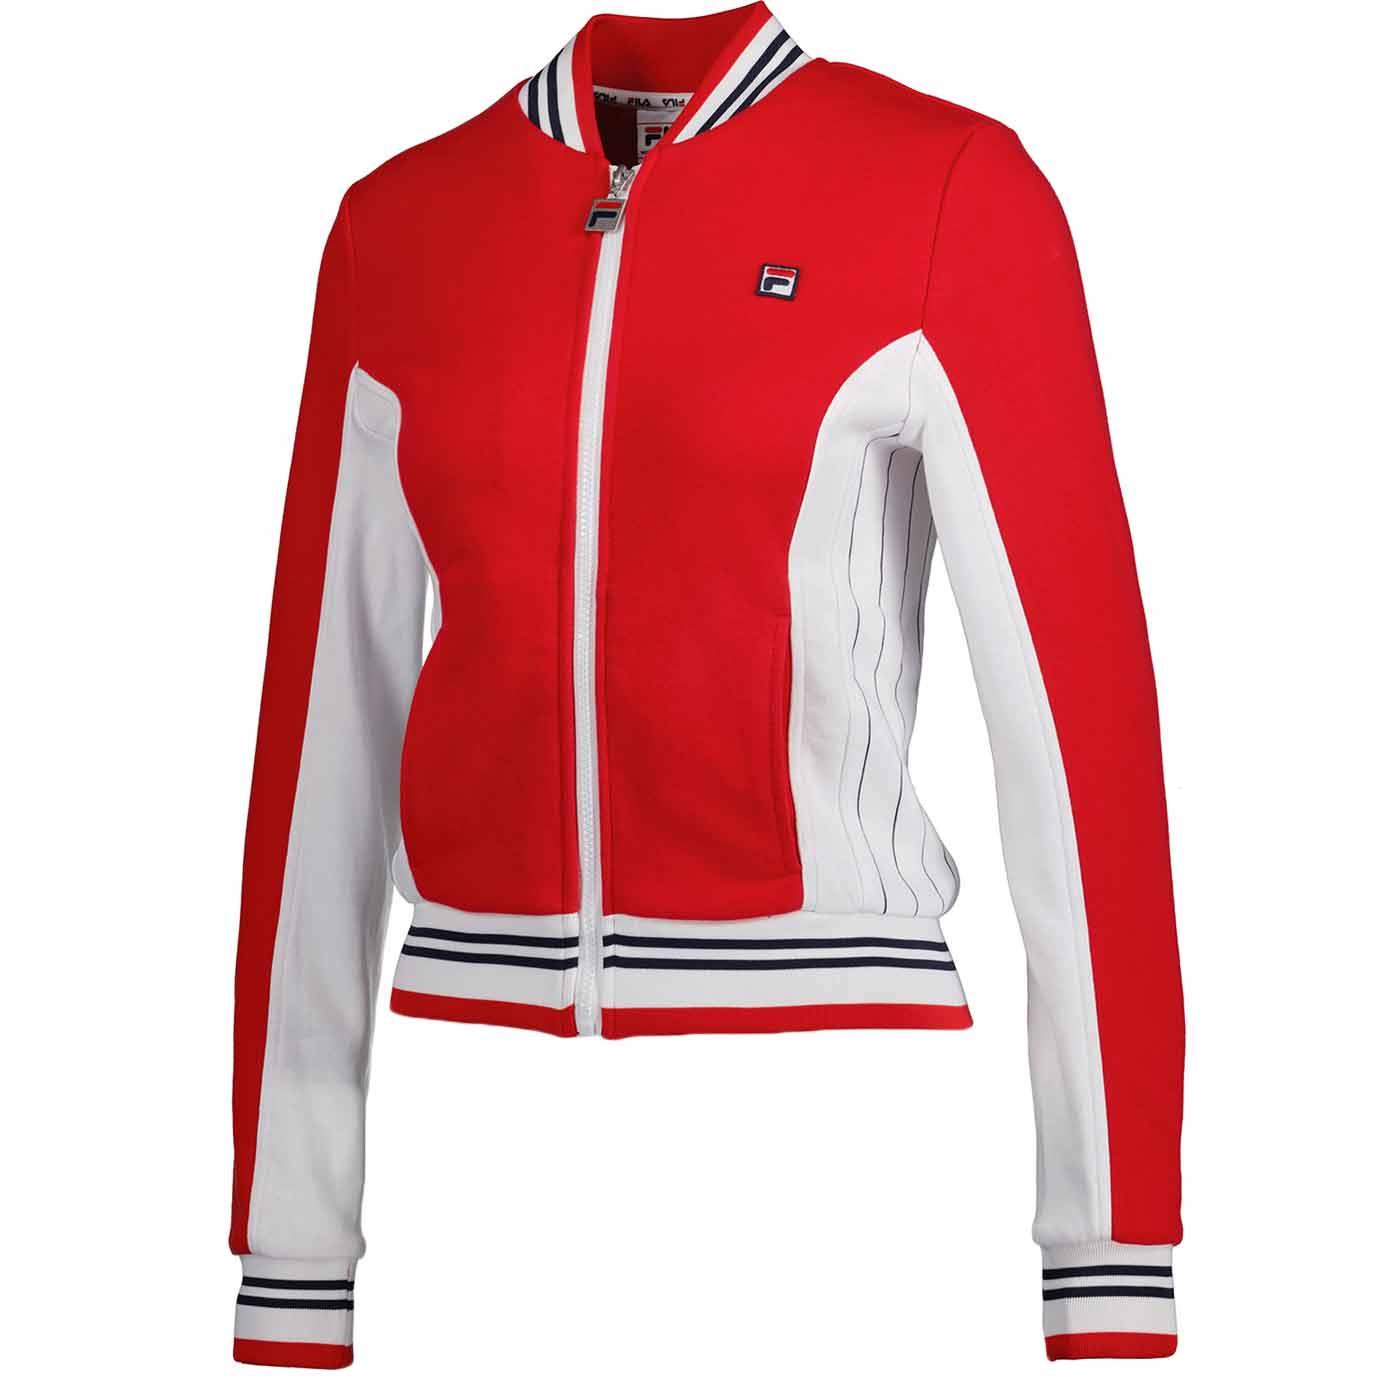 Settanta 2 Fila Vintage French Terry Jacket in Fila Red